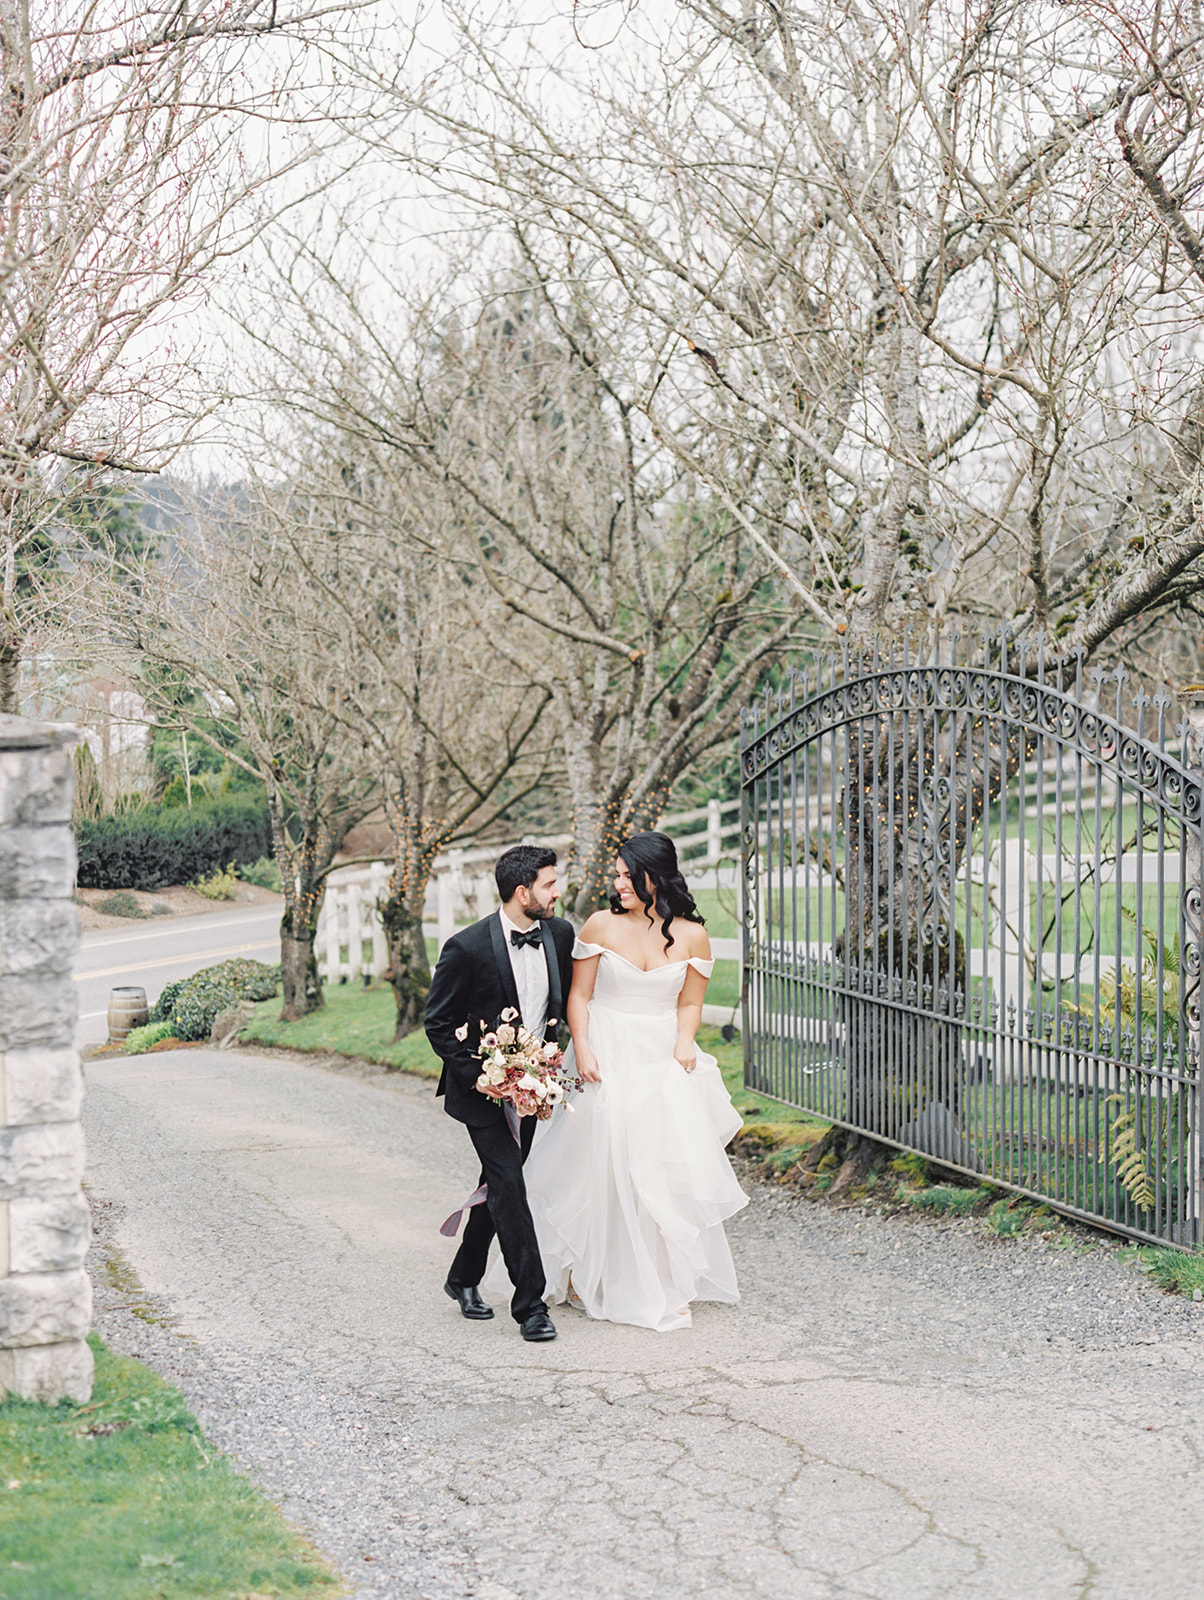 The couple holding hands and walking up the entrance to Chateau Lill